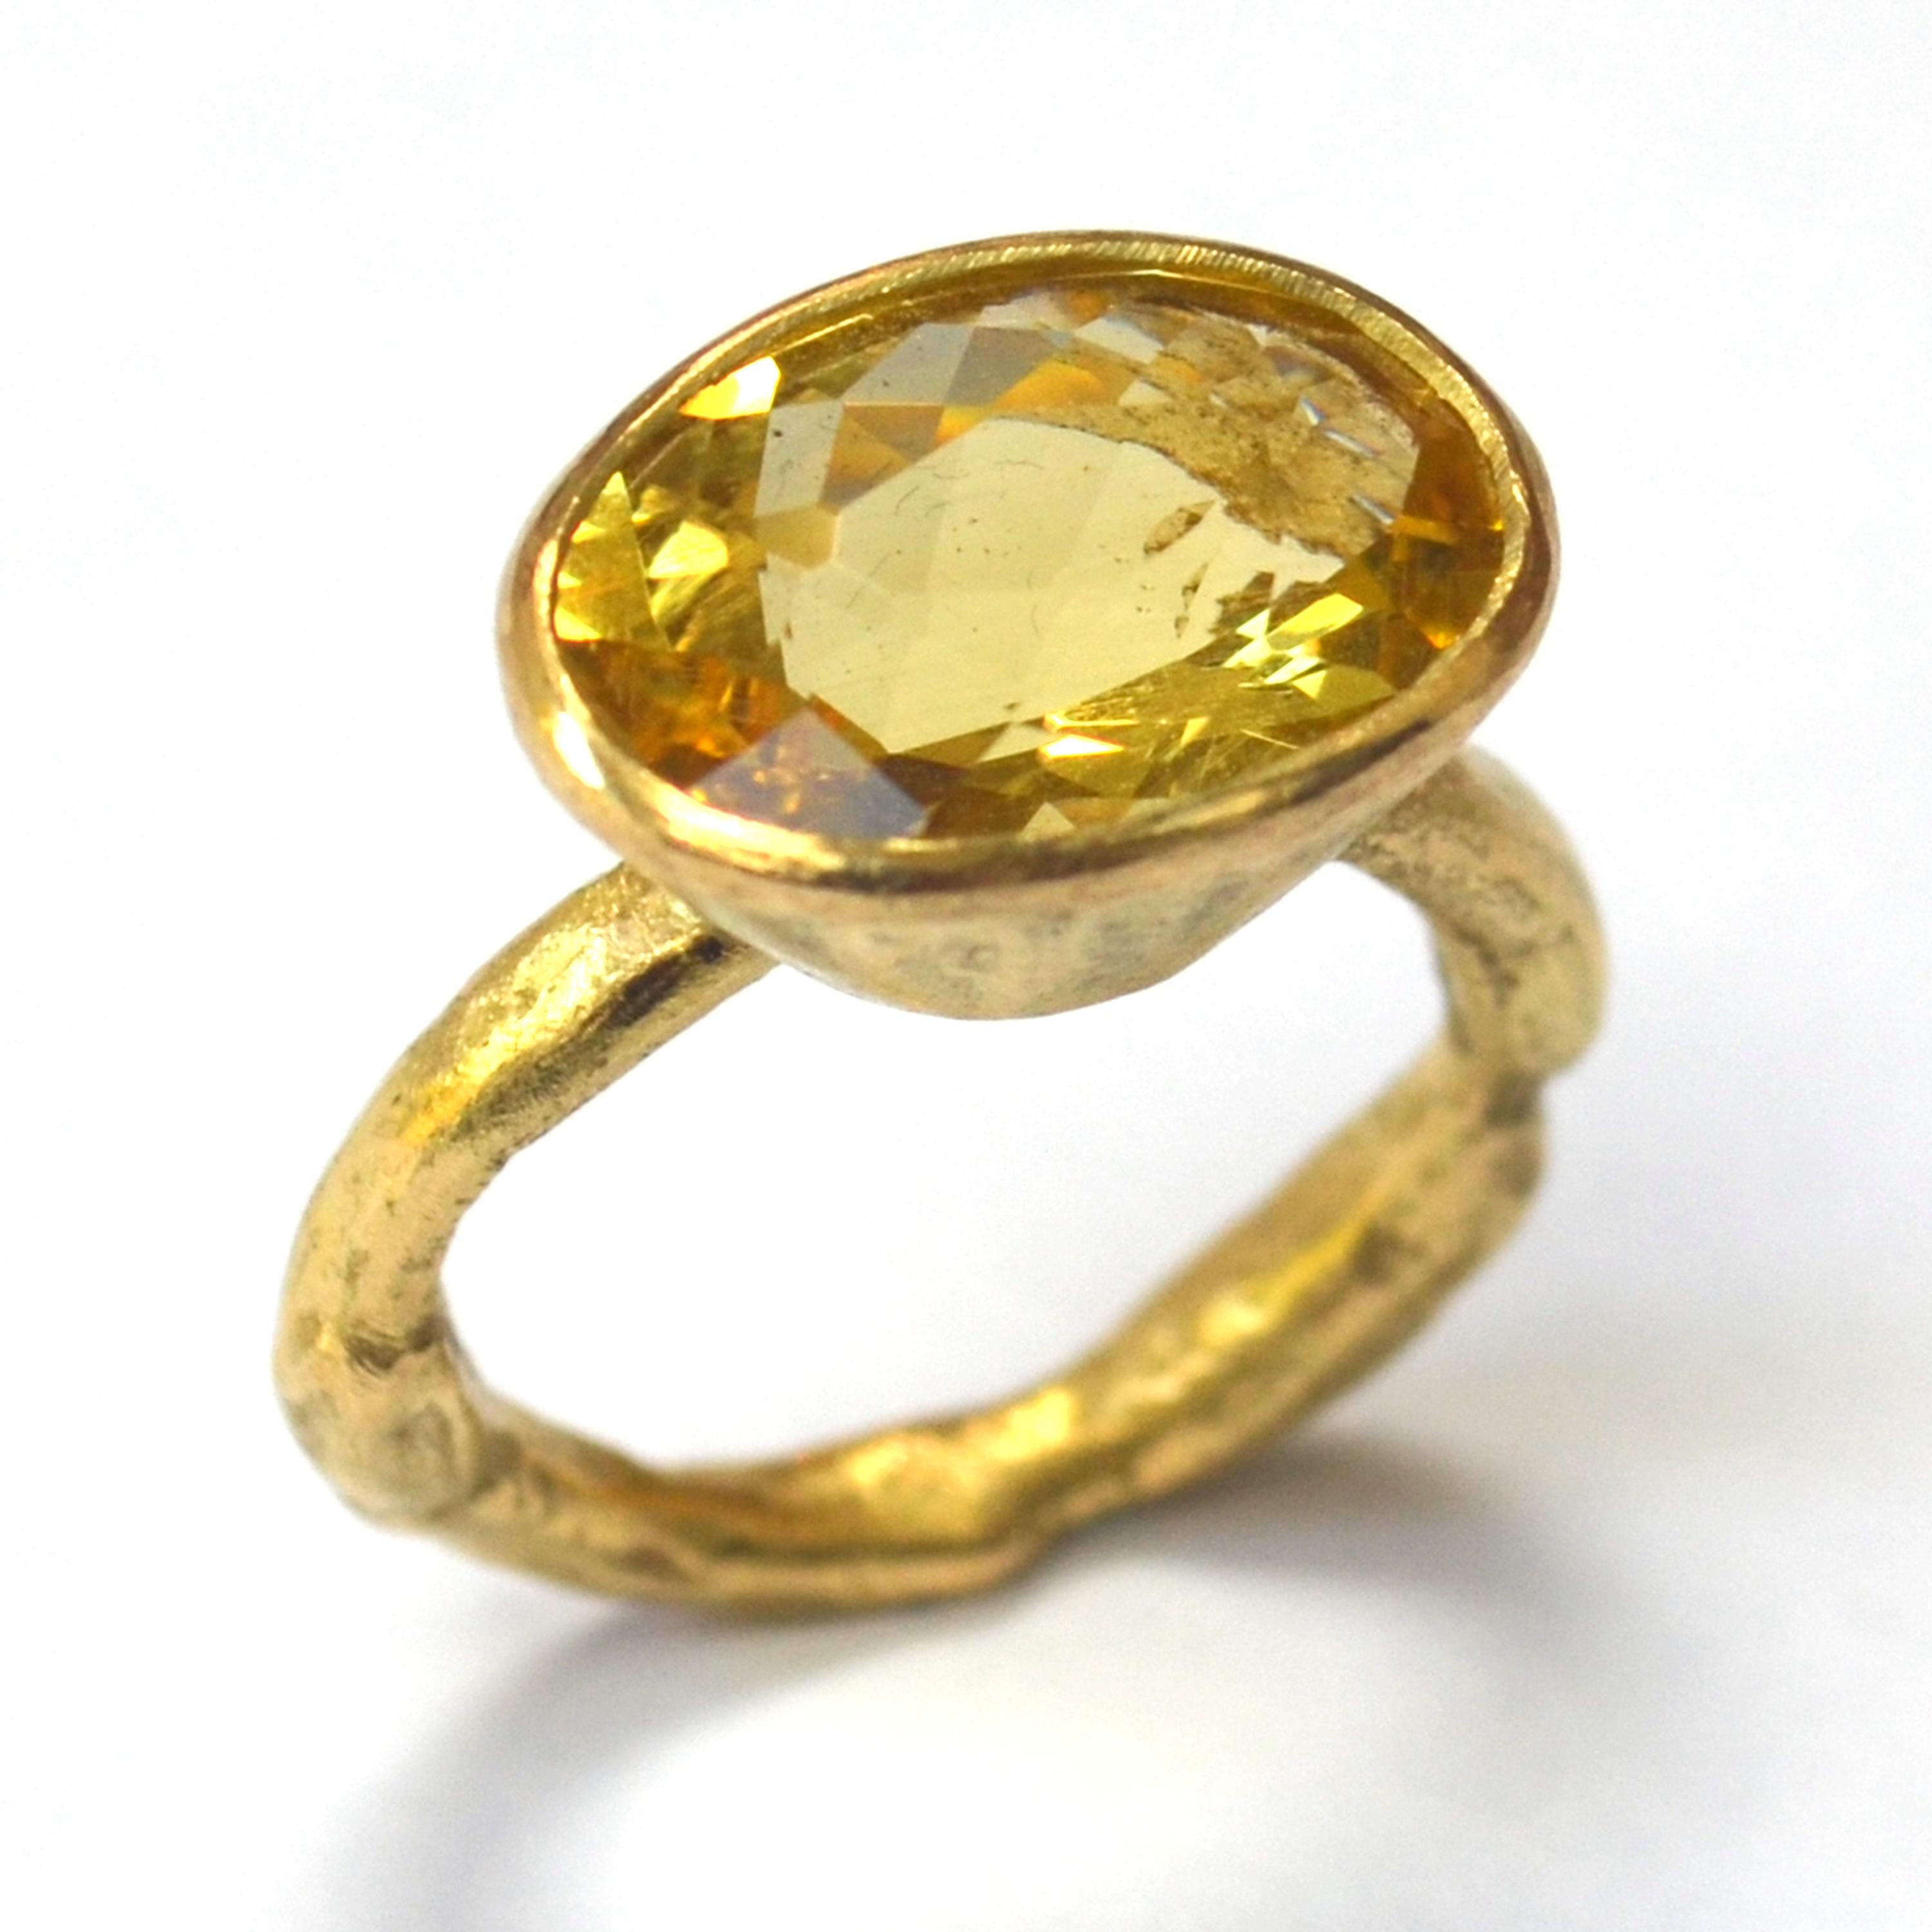 Large oval 6 carat Yellow Zircon set in a tapered 18k yellow gold setting on organic textured 18k yellow gold ring. This ring is a ray of sunshine on your hand! The canary yellow of the Zircon pops in any light and is complimented by the warm tones